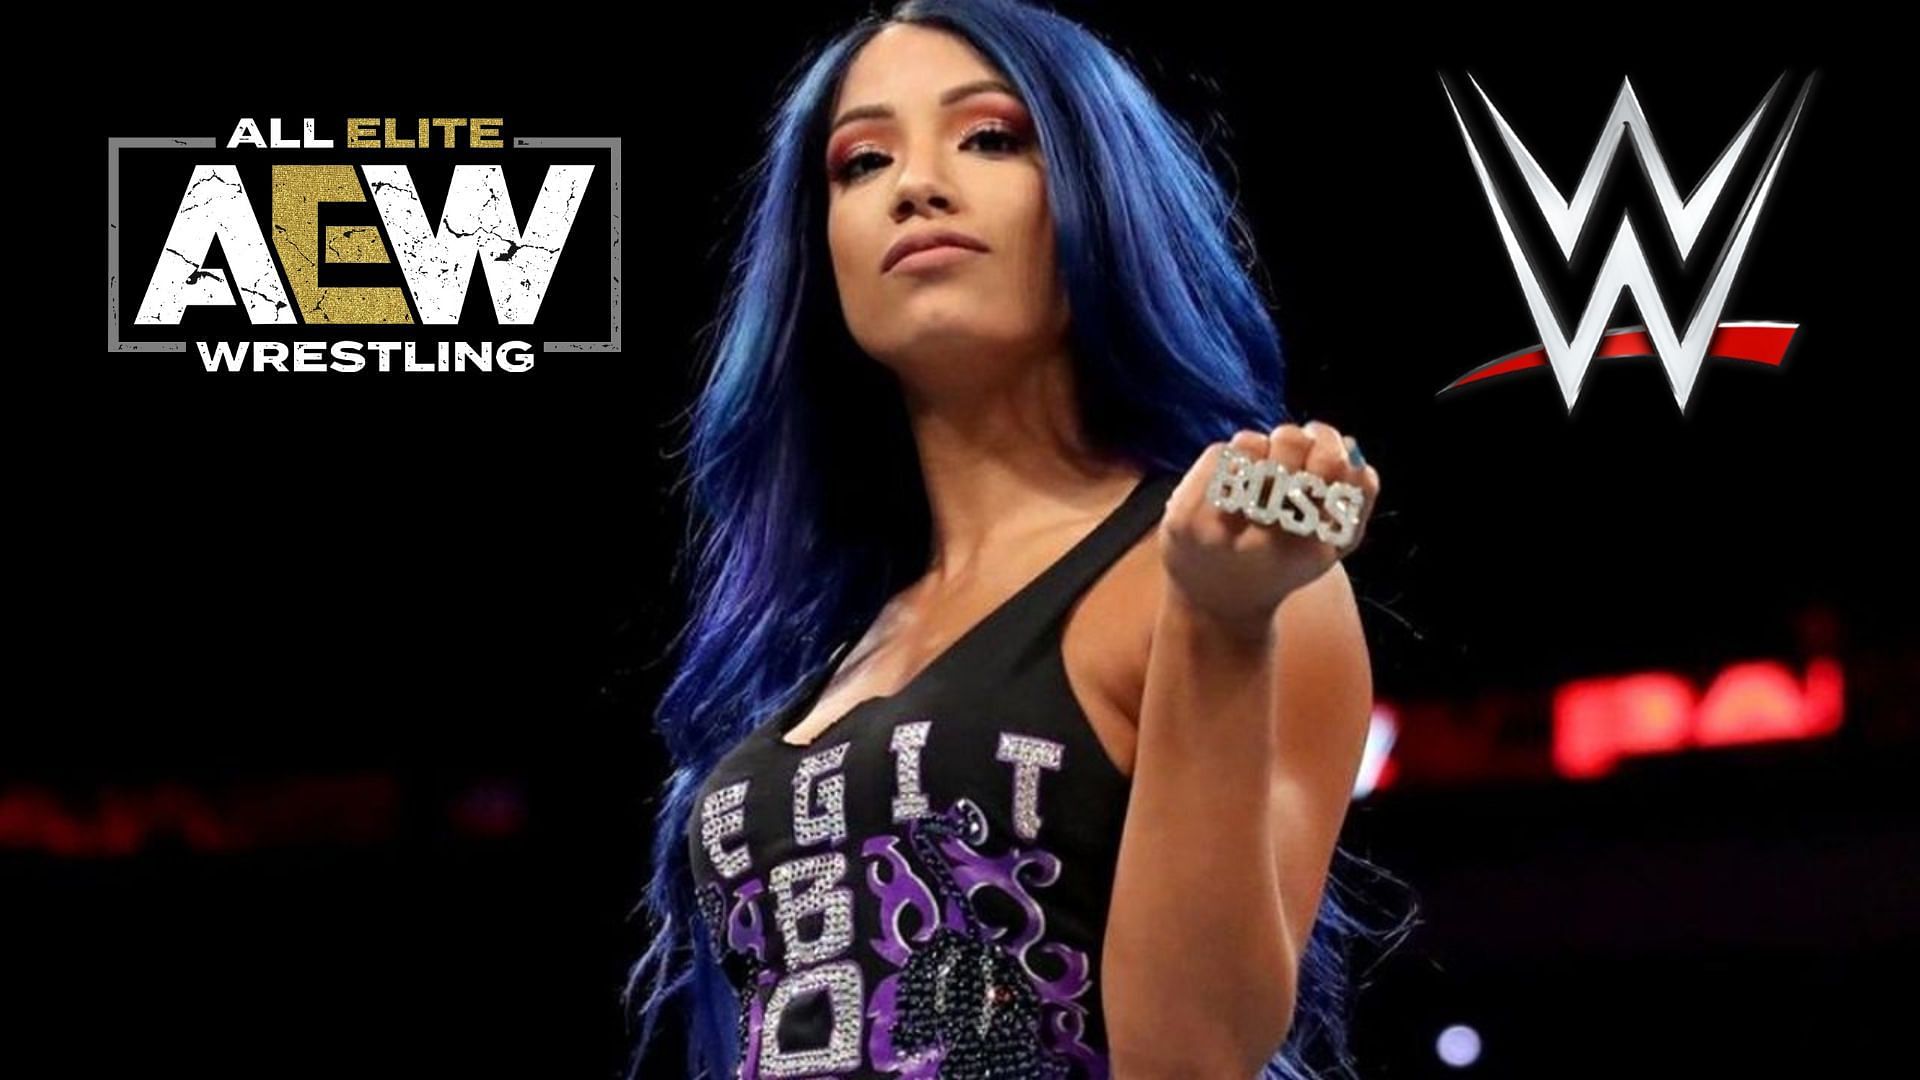 Sasha Banks is yet to make an appearance in the pro-wrestling scene